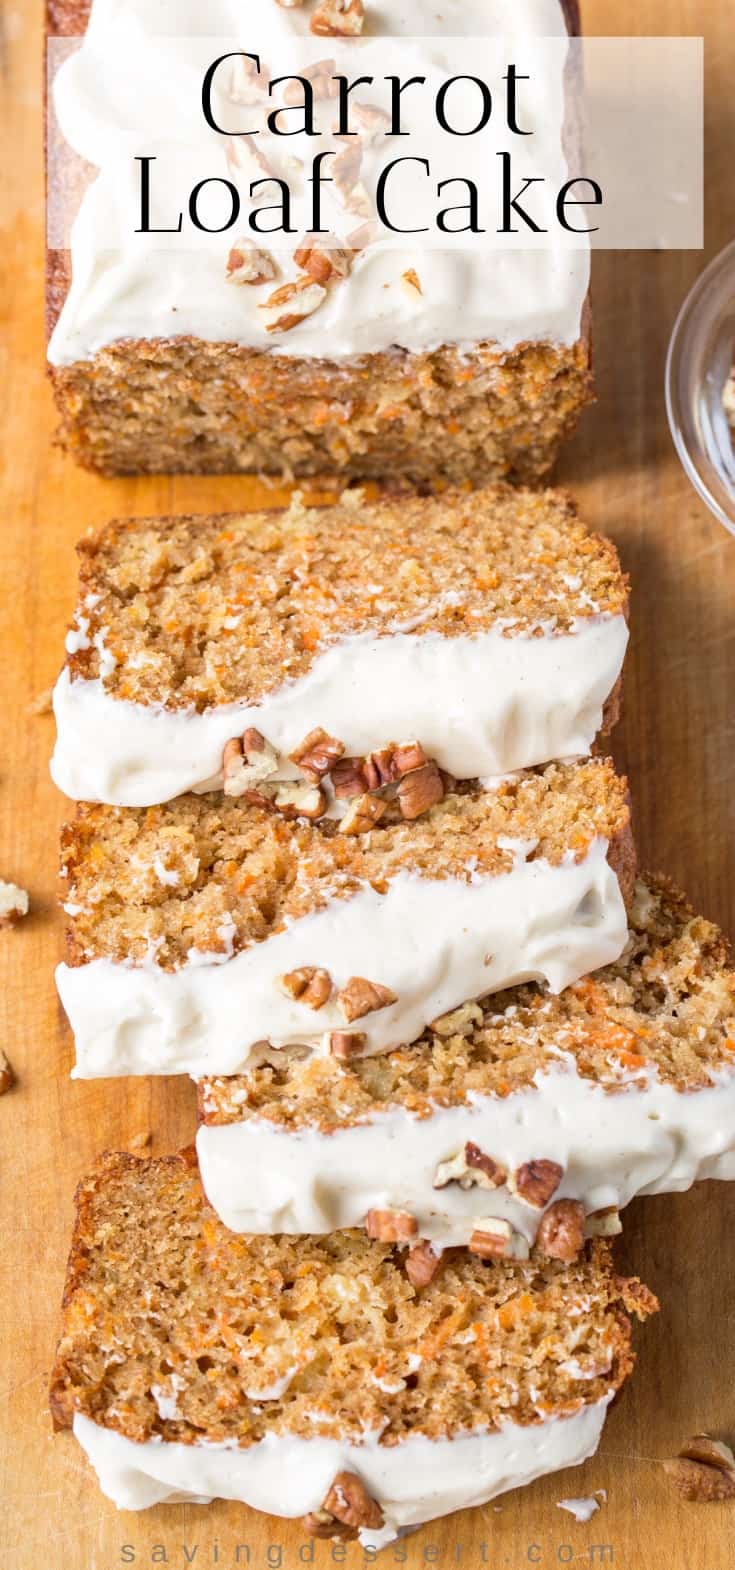 Sliced Carrot Loaf Cake topped with cream cheese icing on a cutting board